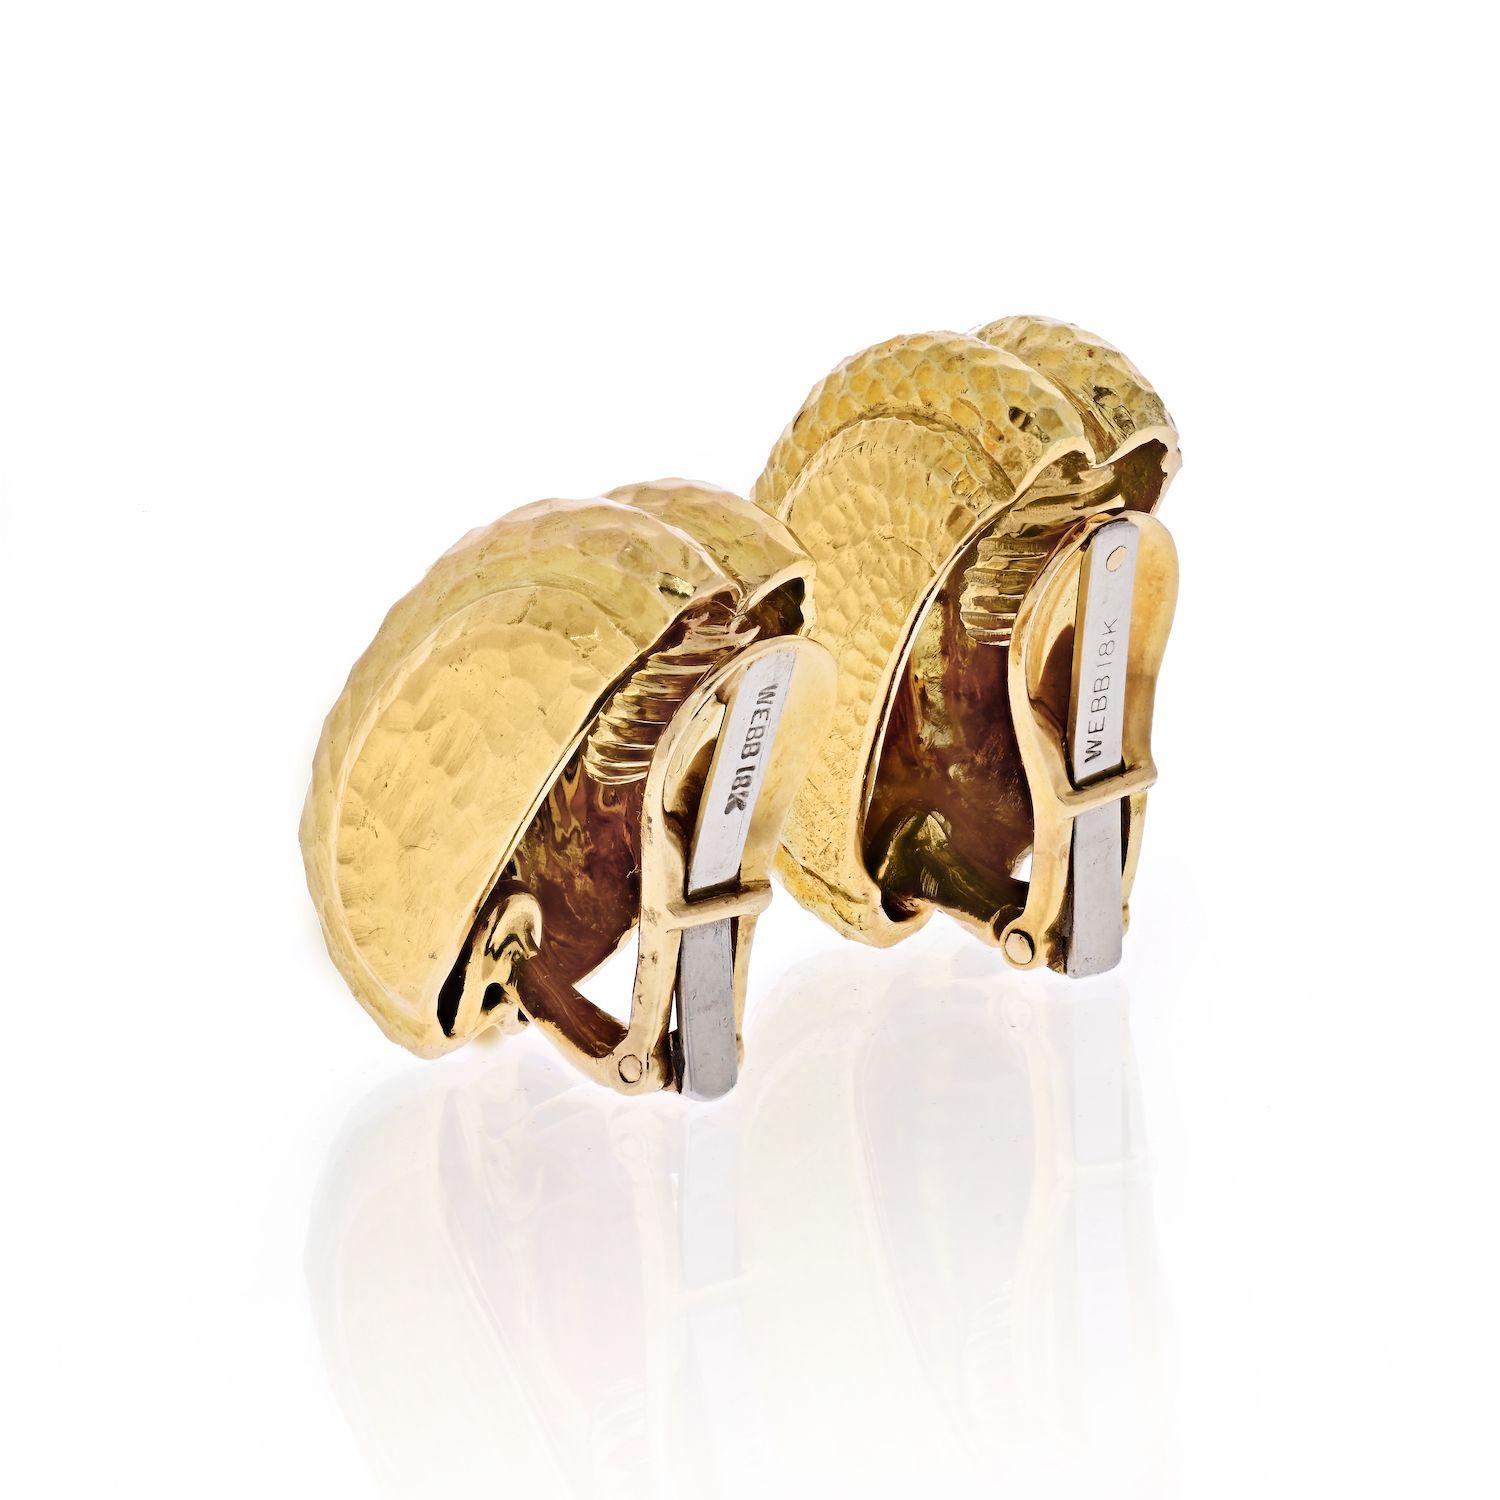 David Webb Platinum & 18K Yellow Gold Hammered Clip-On Earrings. Each designed as a reeded and hammered 18k gold tapered half-hoop.
Length: 24mm
Width: 13mm 